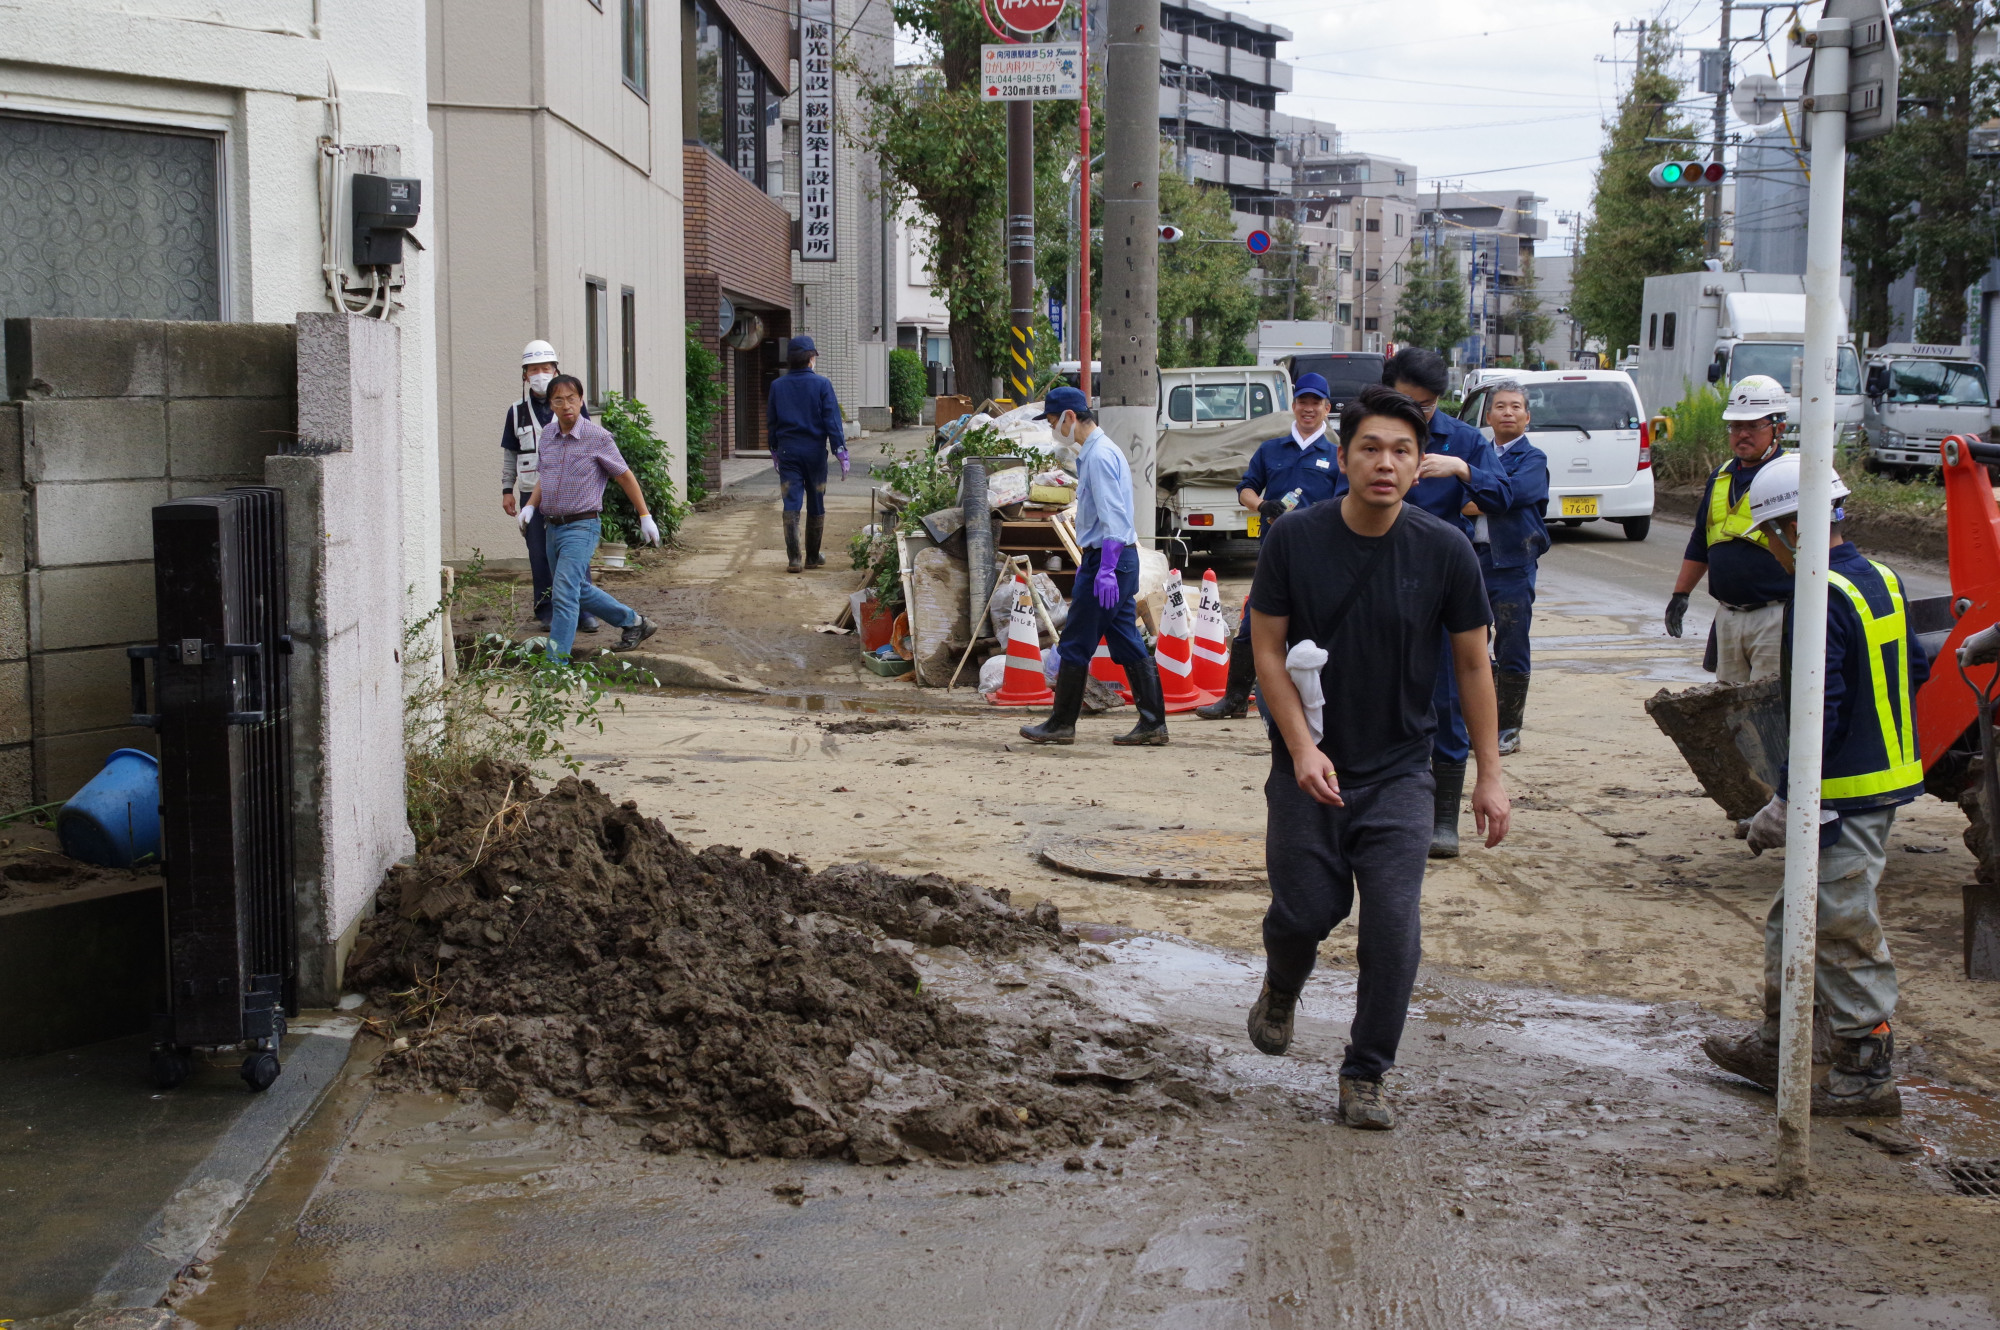 Workers struggle to clean mud and garbage left after the flood in the Kami-Maruko district near JR Musashikosugi Station in Kawasaki, Kanagawa Prefecture, on Tuesday. The flood is believed to have been caused by back-streaming from underground drains connected to the Tama River due to Typhoon Hagibis. | REIJI YOSHIDA